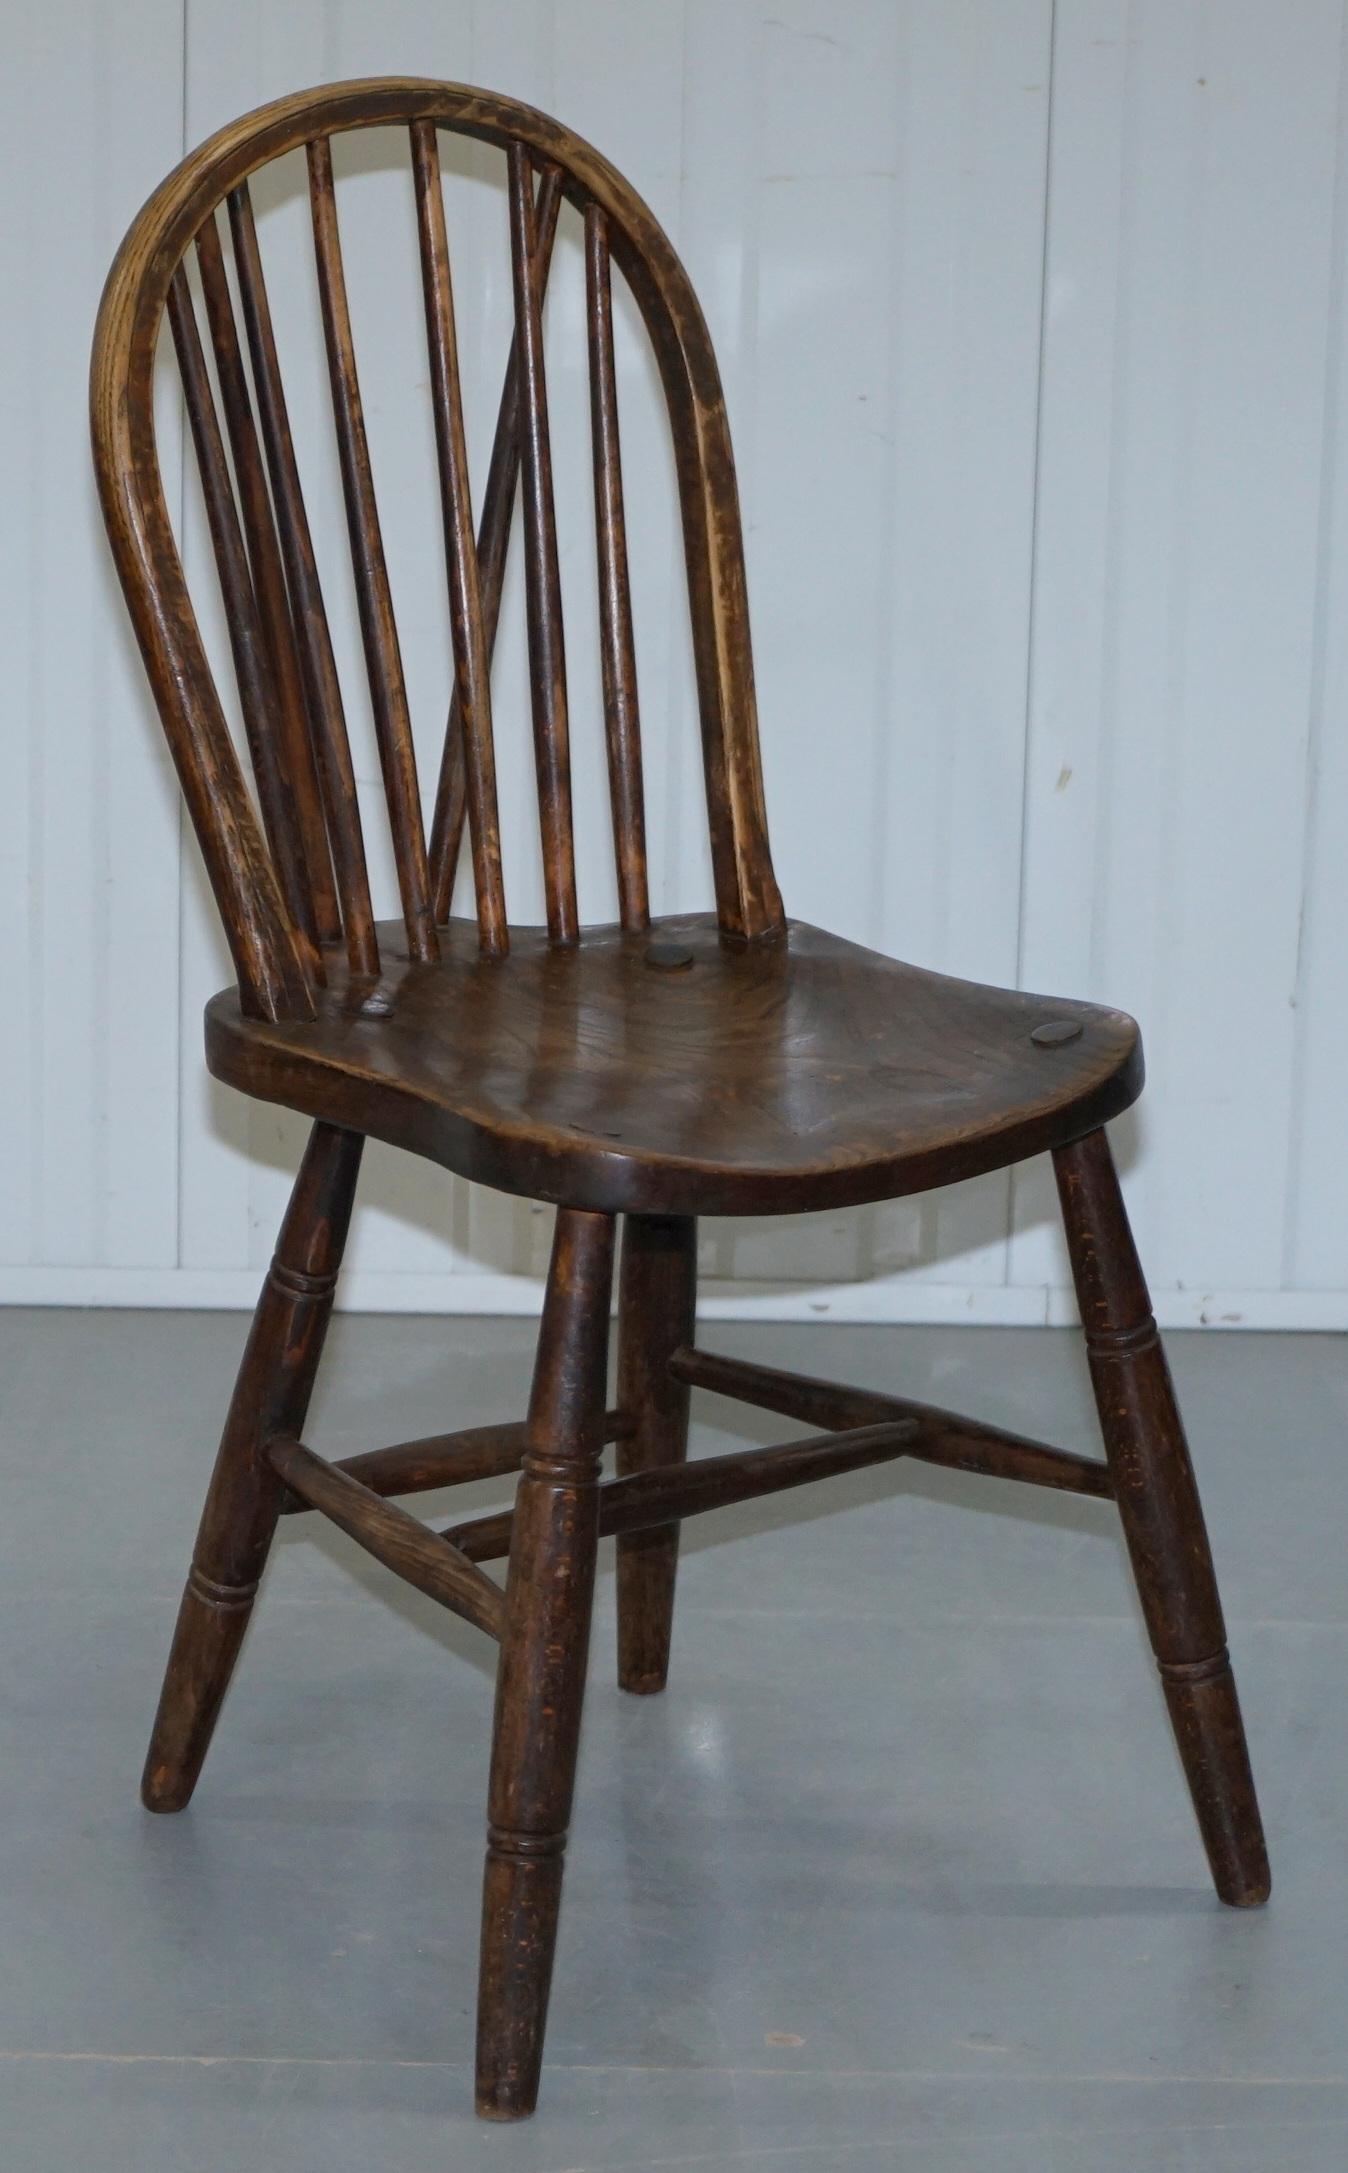 Rare Pair of Fully Stamped Victorian 1840 Hoop Back Windsor Chairs High Wycombe 4